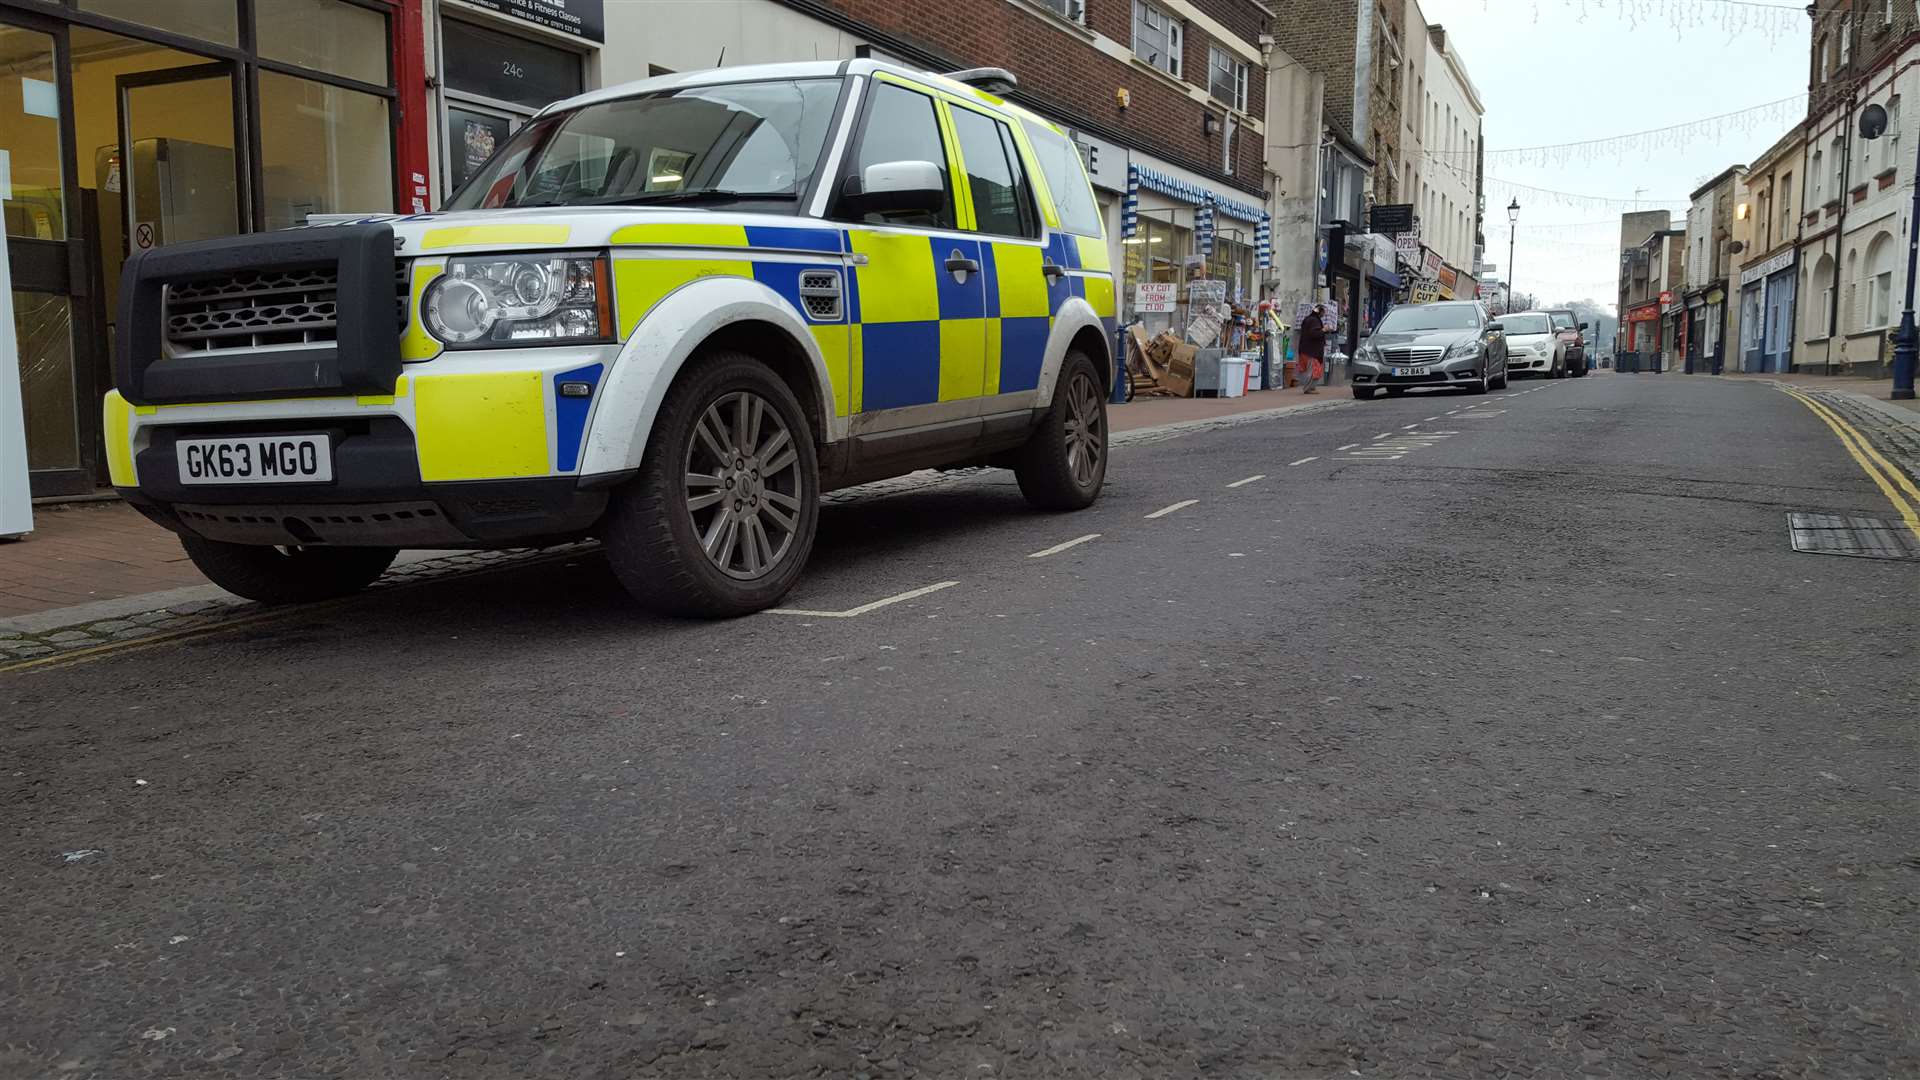 One of a number of police vehicles sighted in and around Queen Street